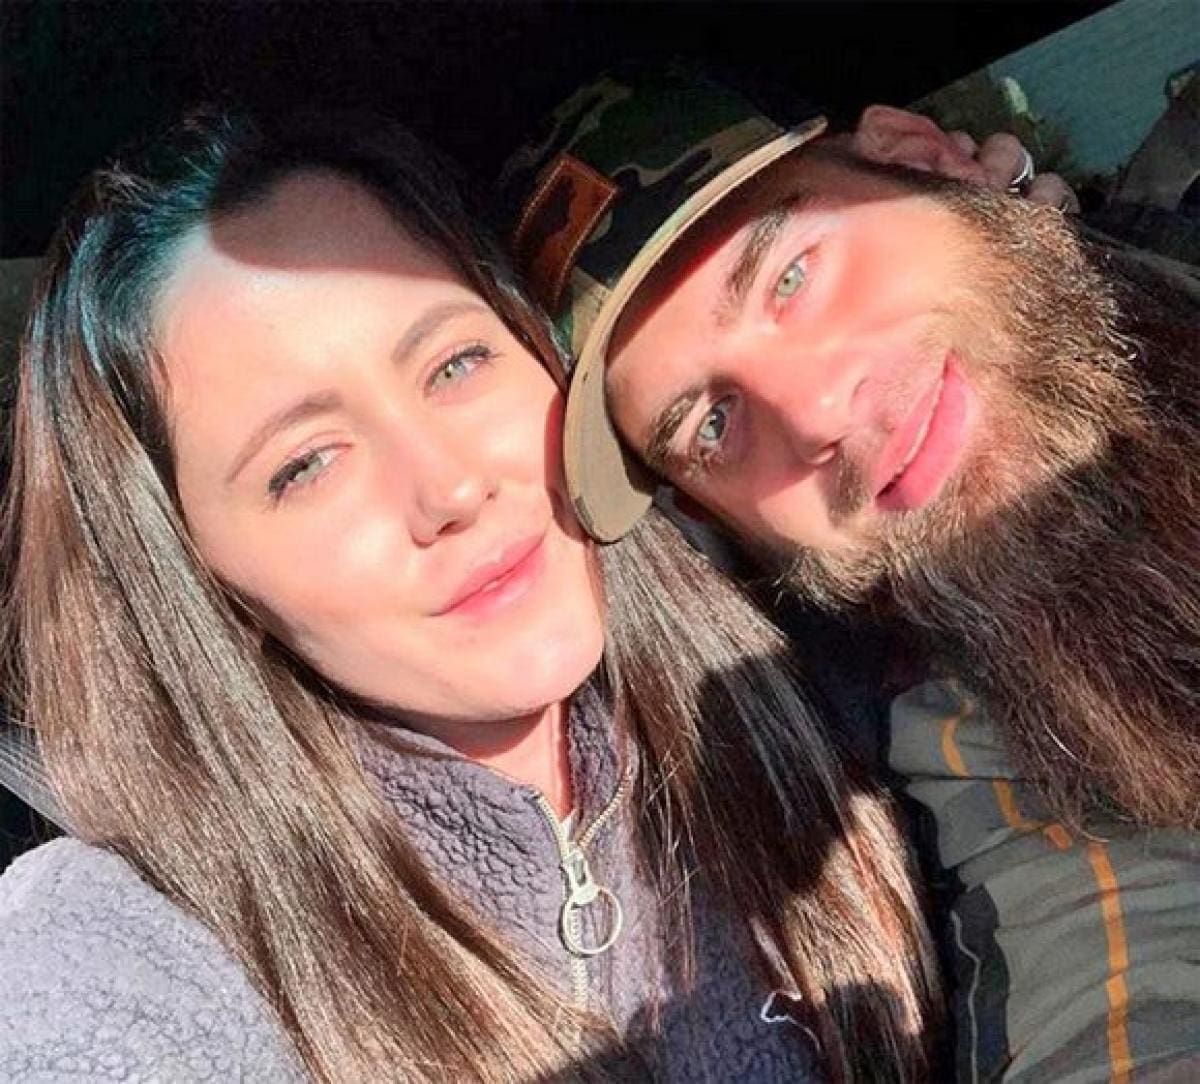 david-eason-reportedly-stormed-out-of-supervised-visit-with-his-and-jenelle-evans-children-after-daughter-refused-to-see-him